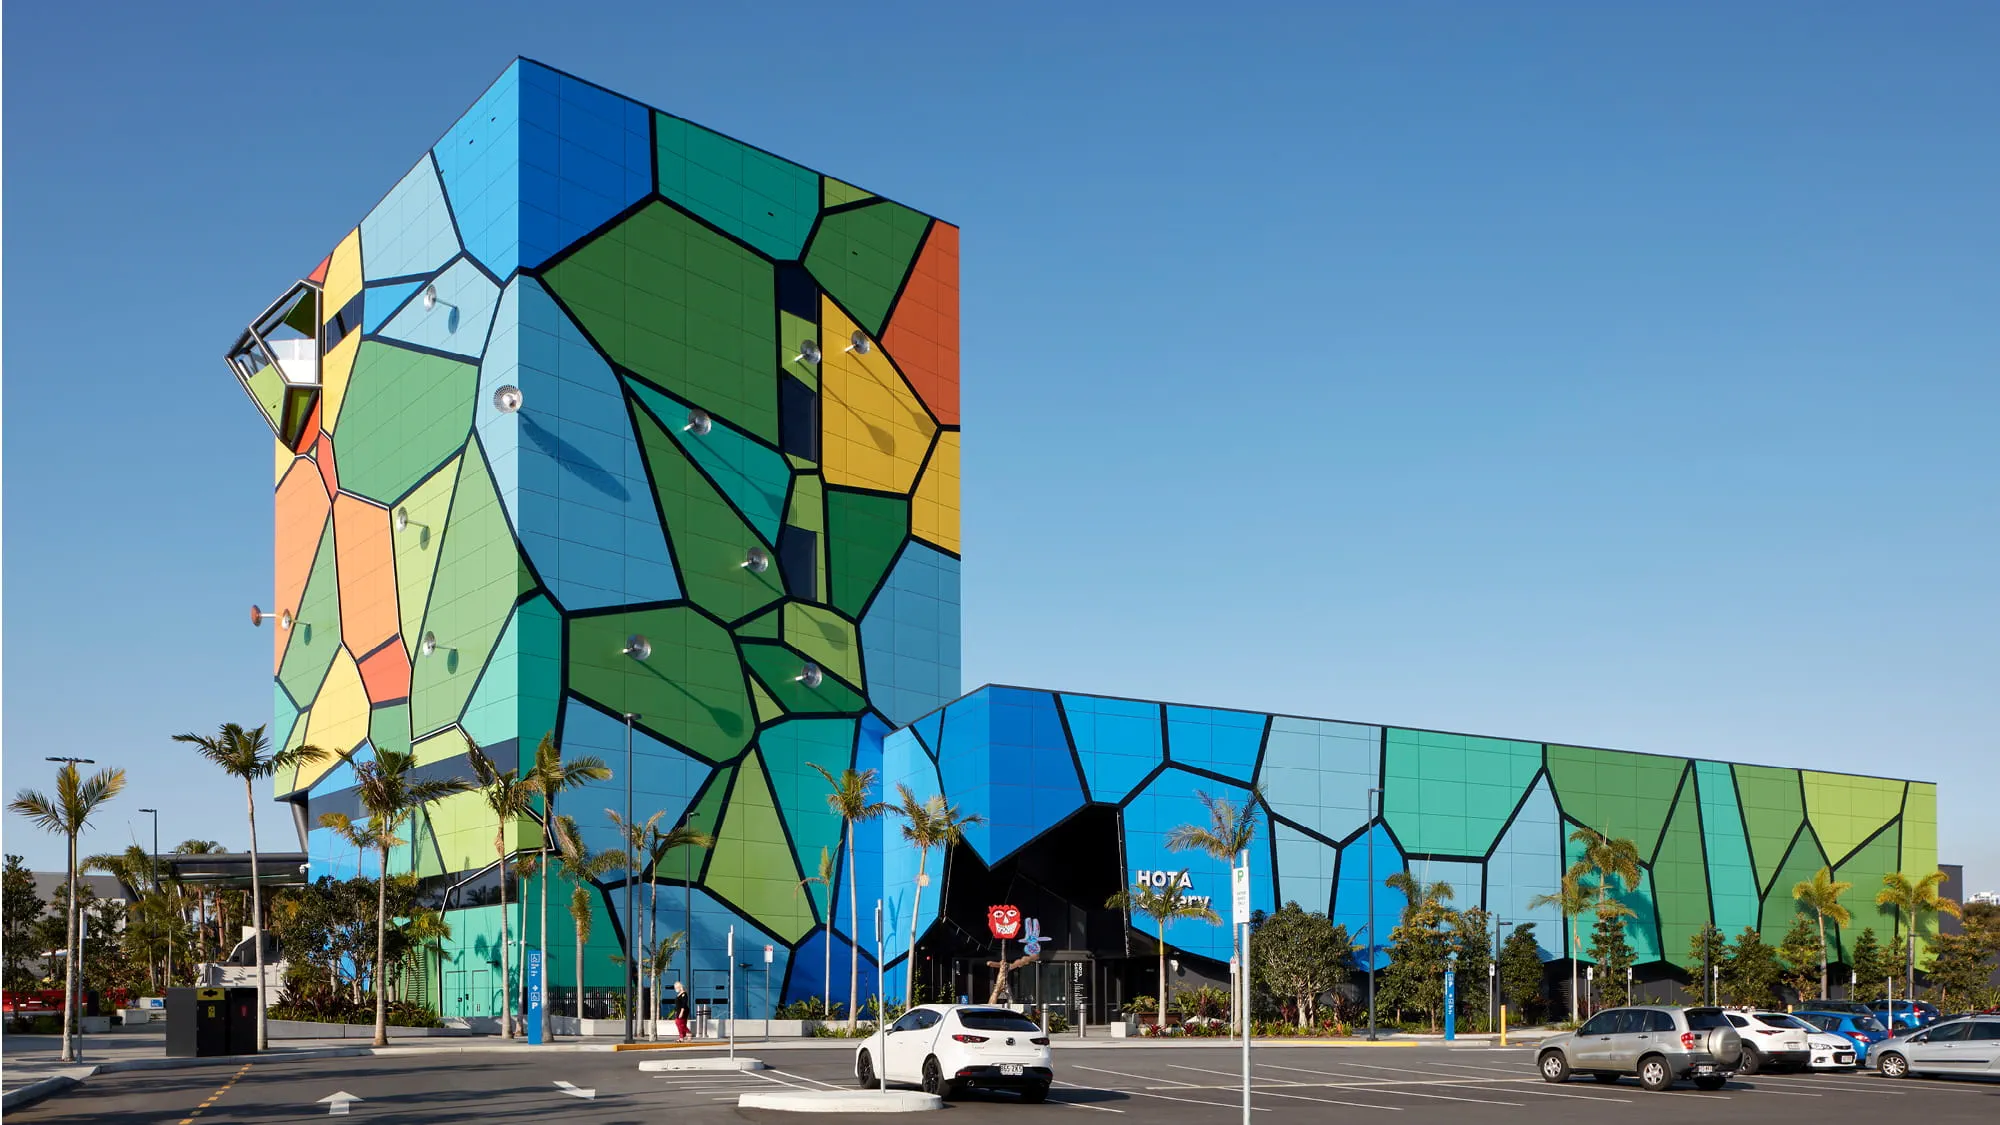 Street view of the HOTA Gallery, Queensland